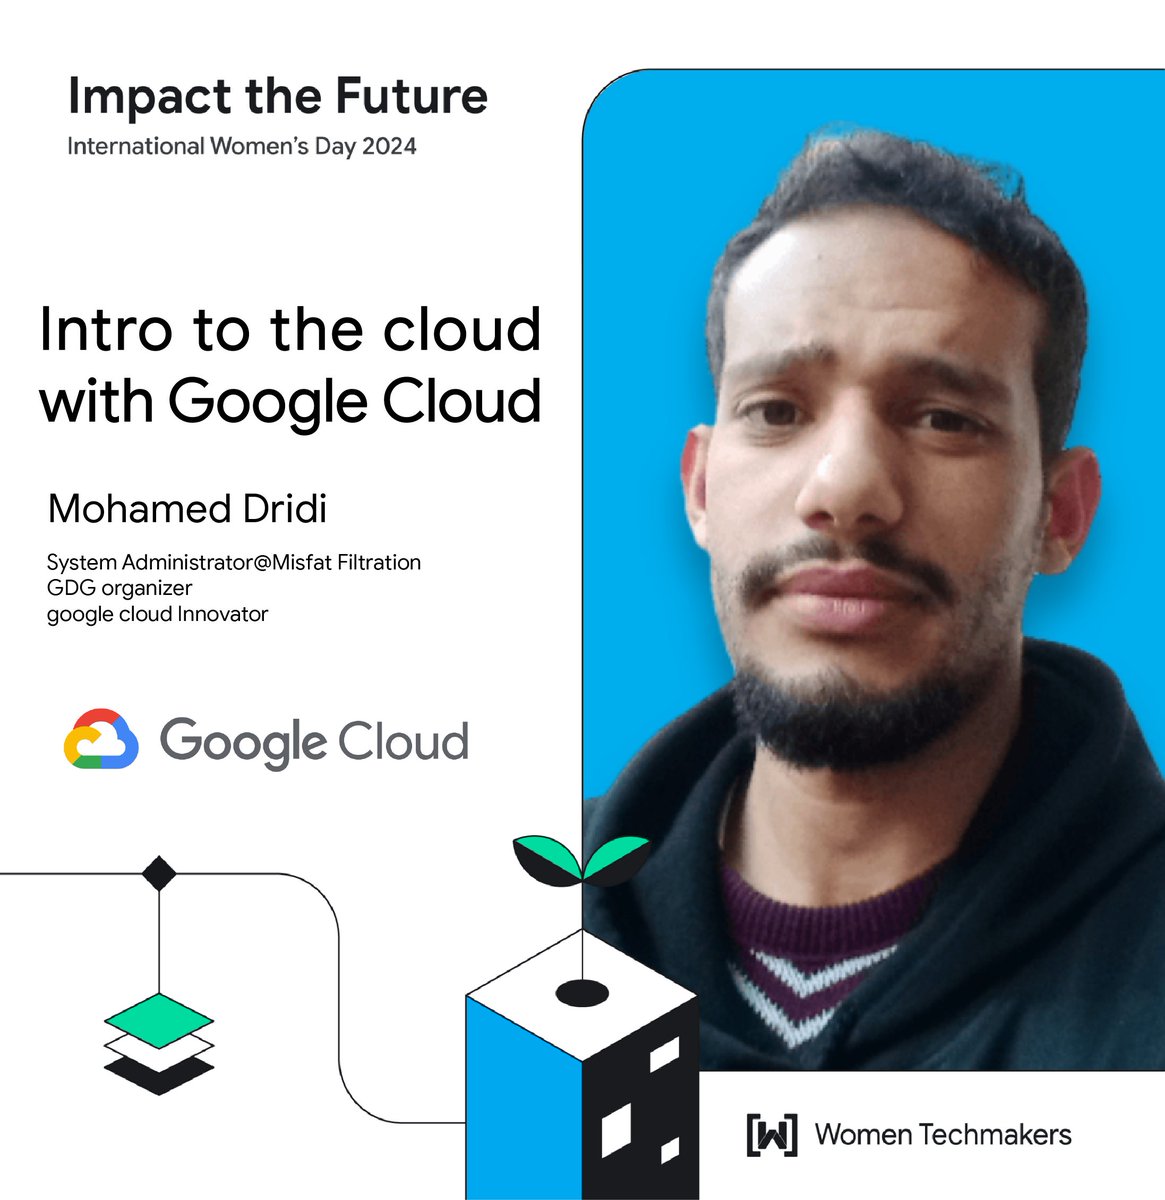 🌟 Join us for our 'Mastering Cloud Technologies' workshop with Mohamed Dridi  at IWD 2024 Event  : Impact the Future on April 20th 🕒 at ISET Beja 📍! 

Register now  ➡️ forms.gle/wwMKiPhBcRYC84…

 #GDGBeja #GDGBizerte #CloudComputing #TechWorkshop #IWD2024